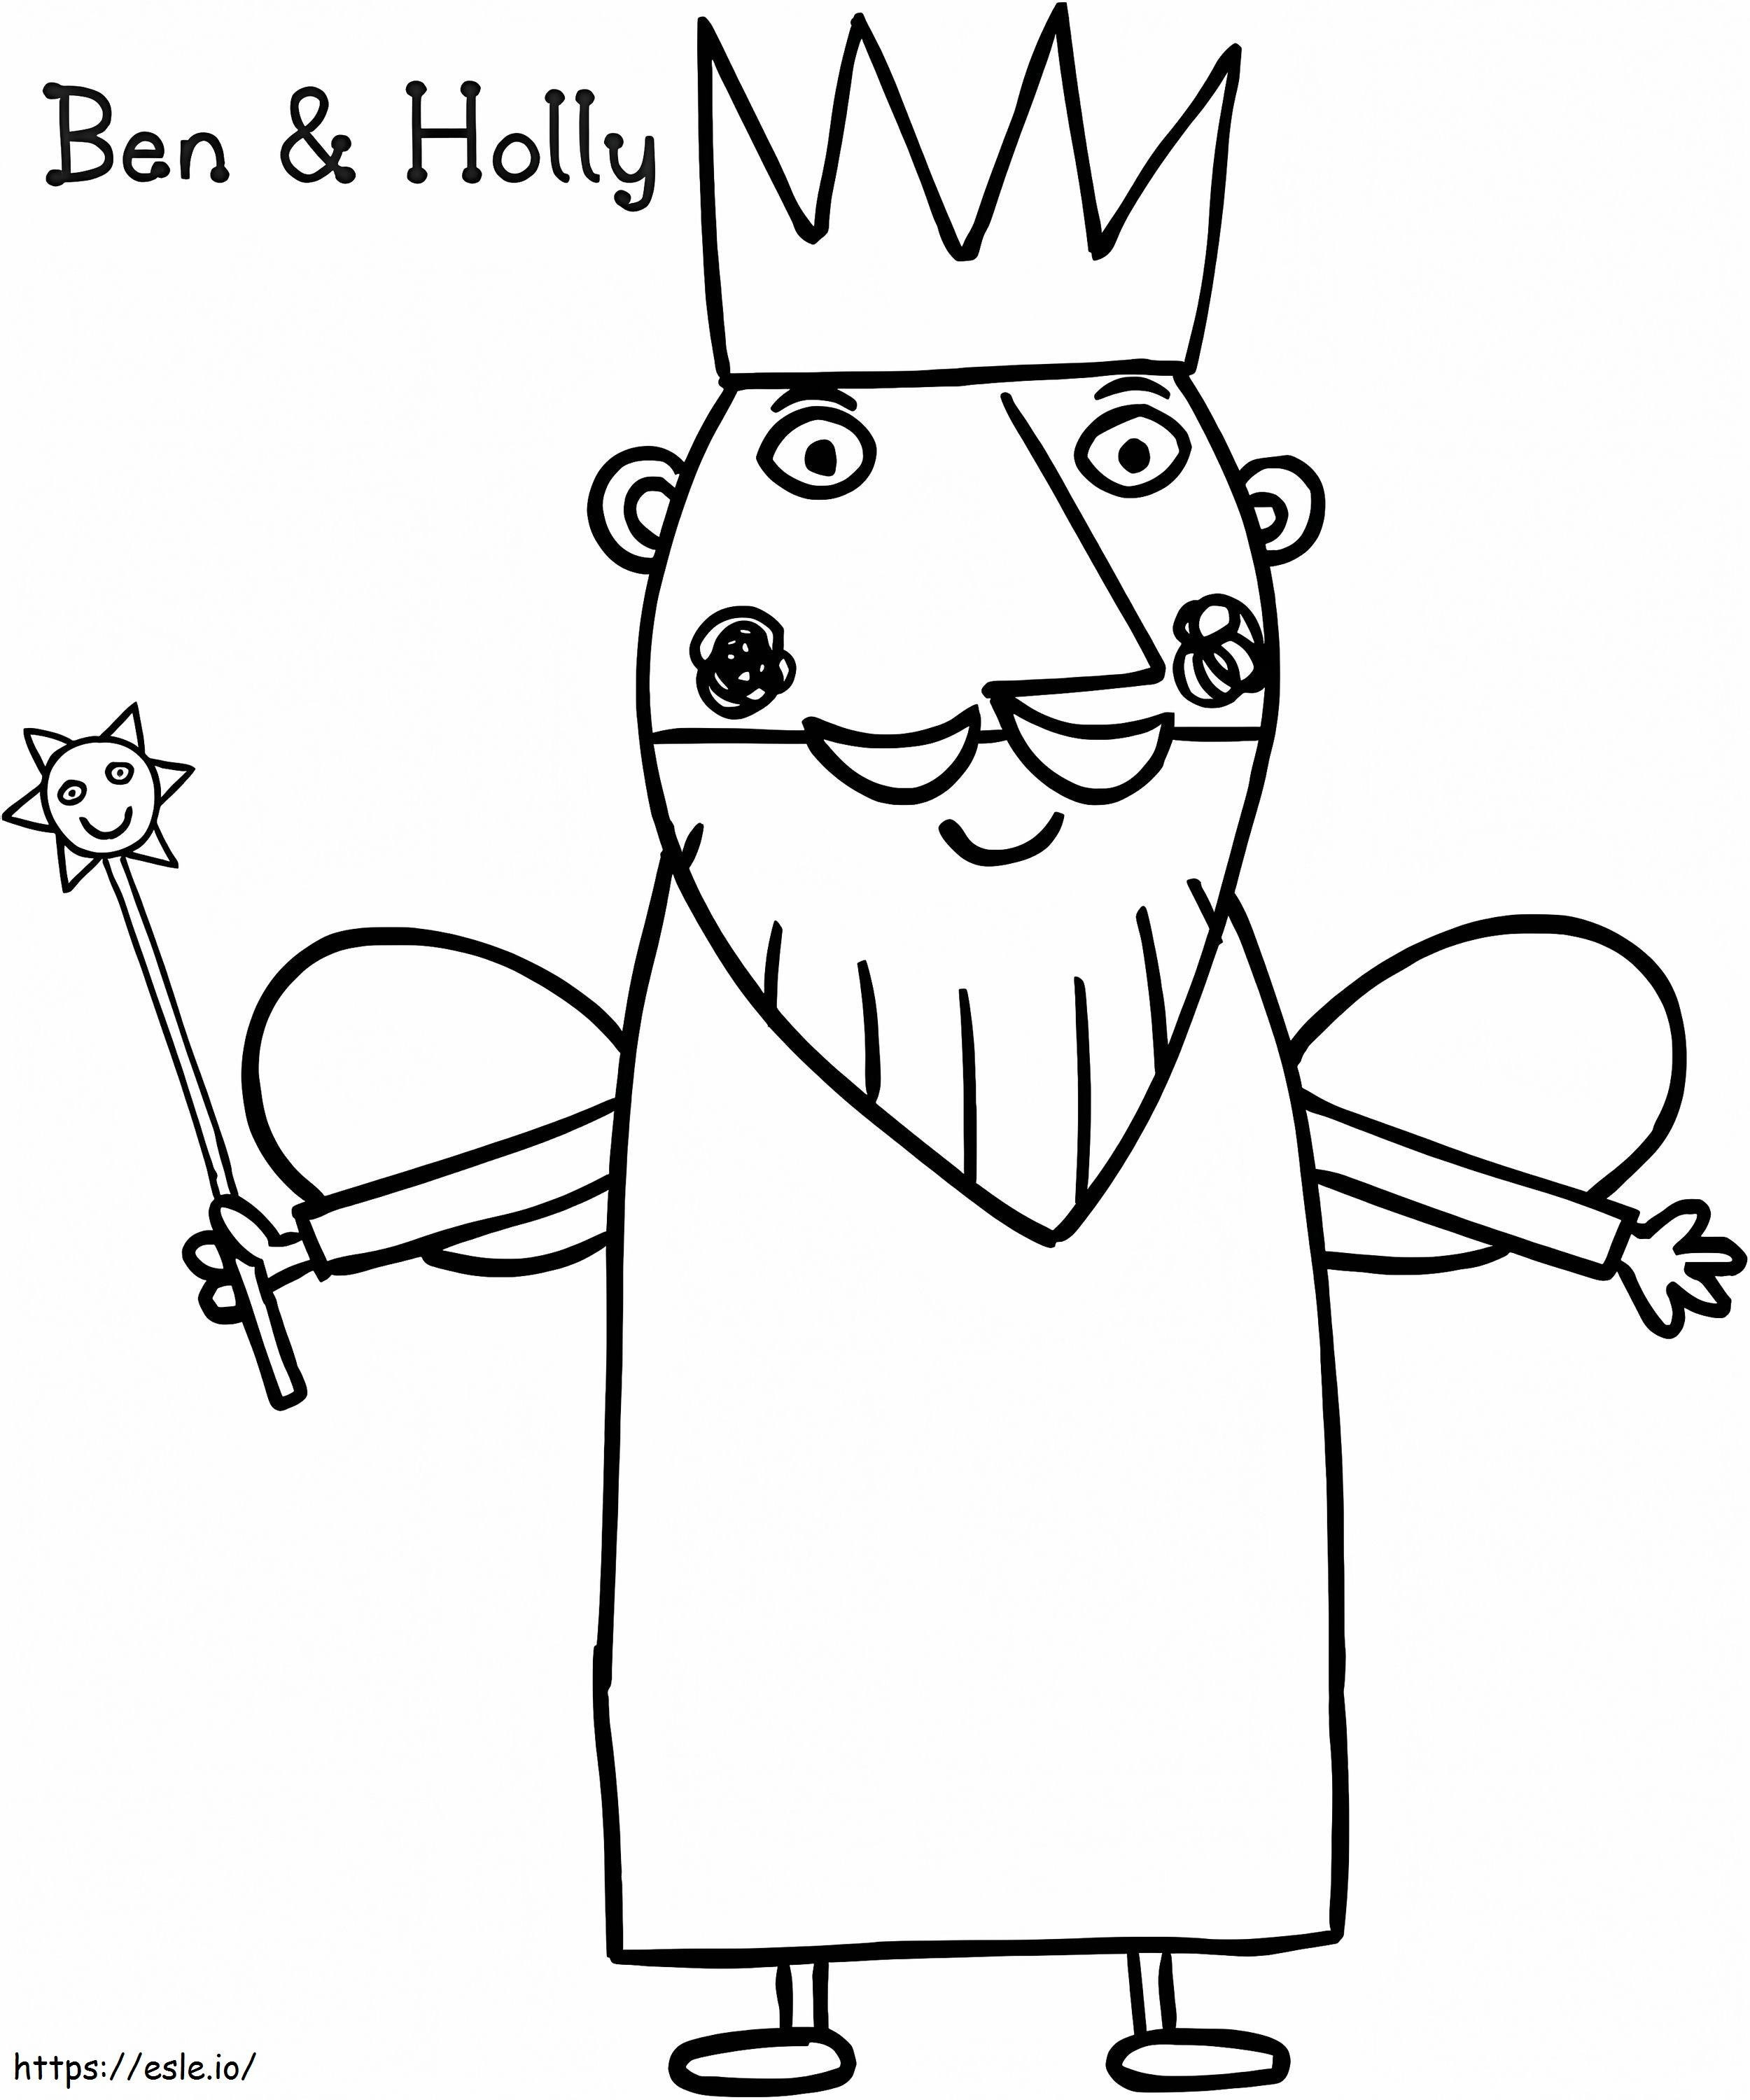 1559530044 King Thistle A4 coloring page